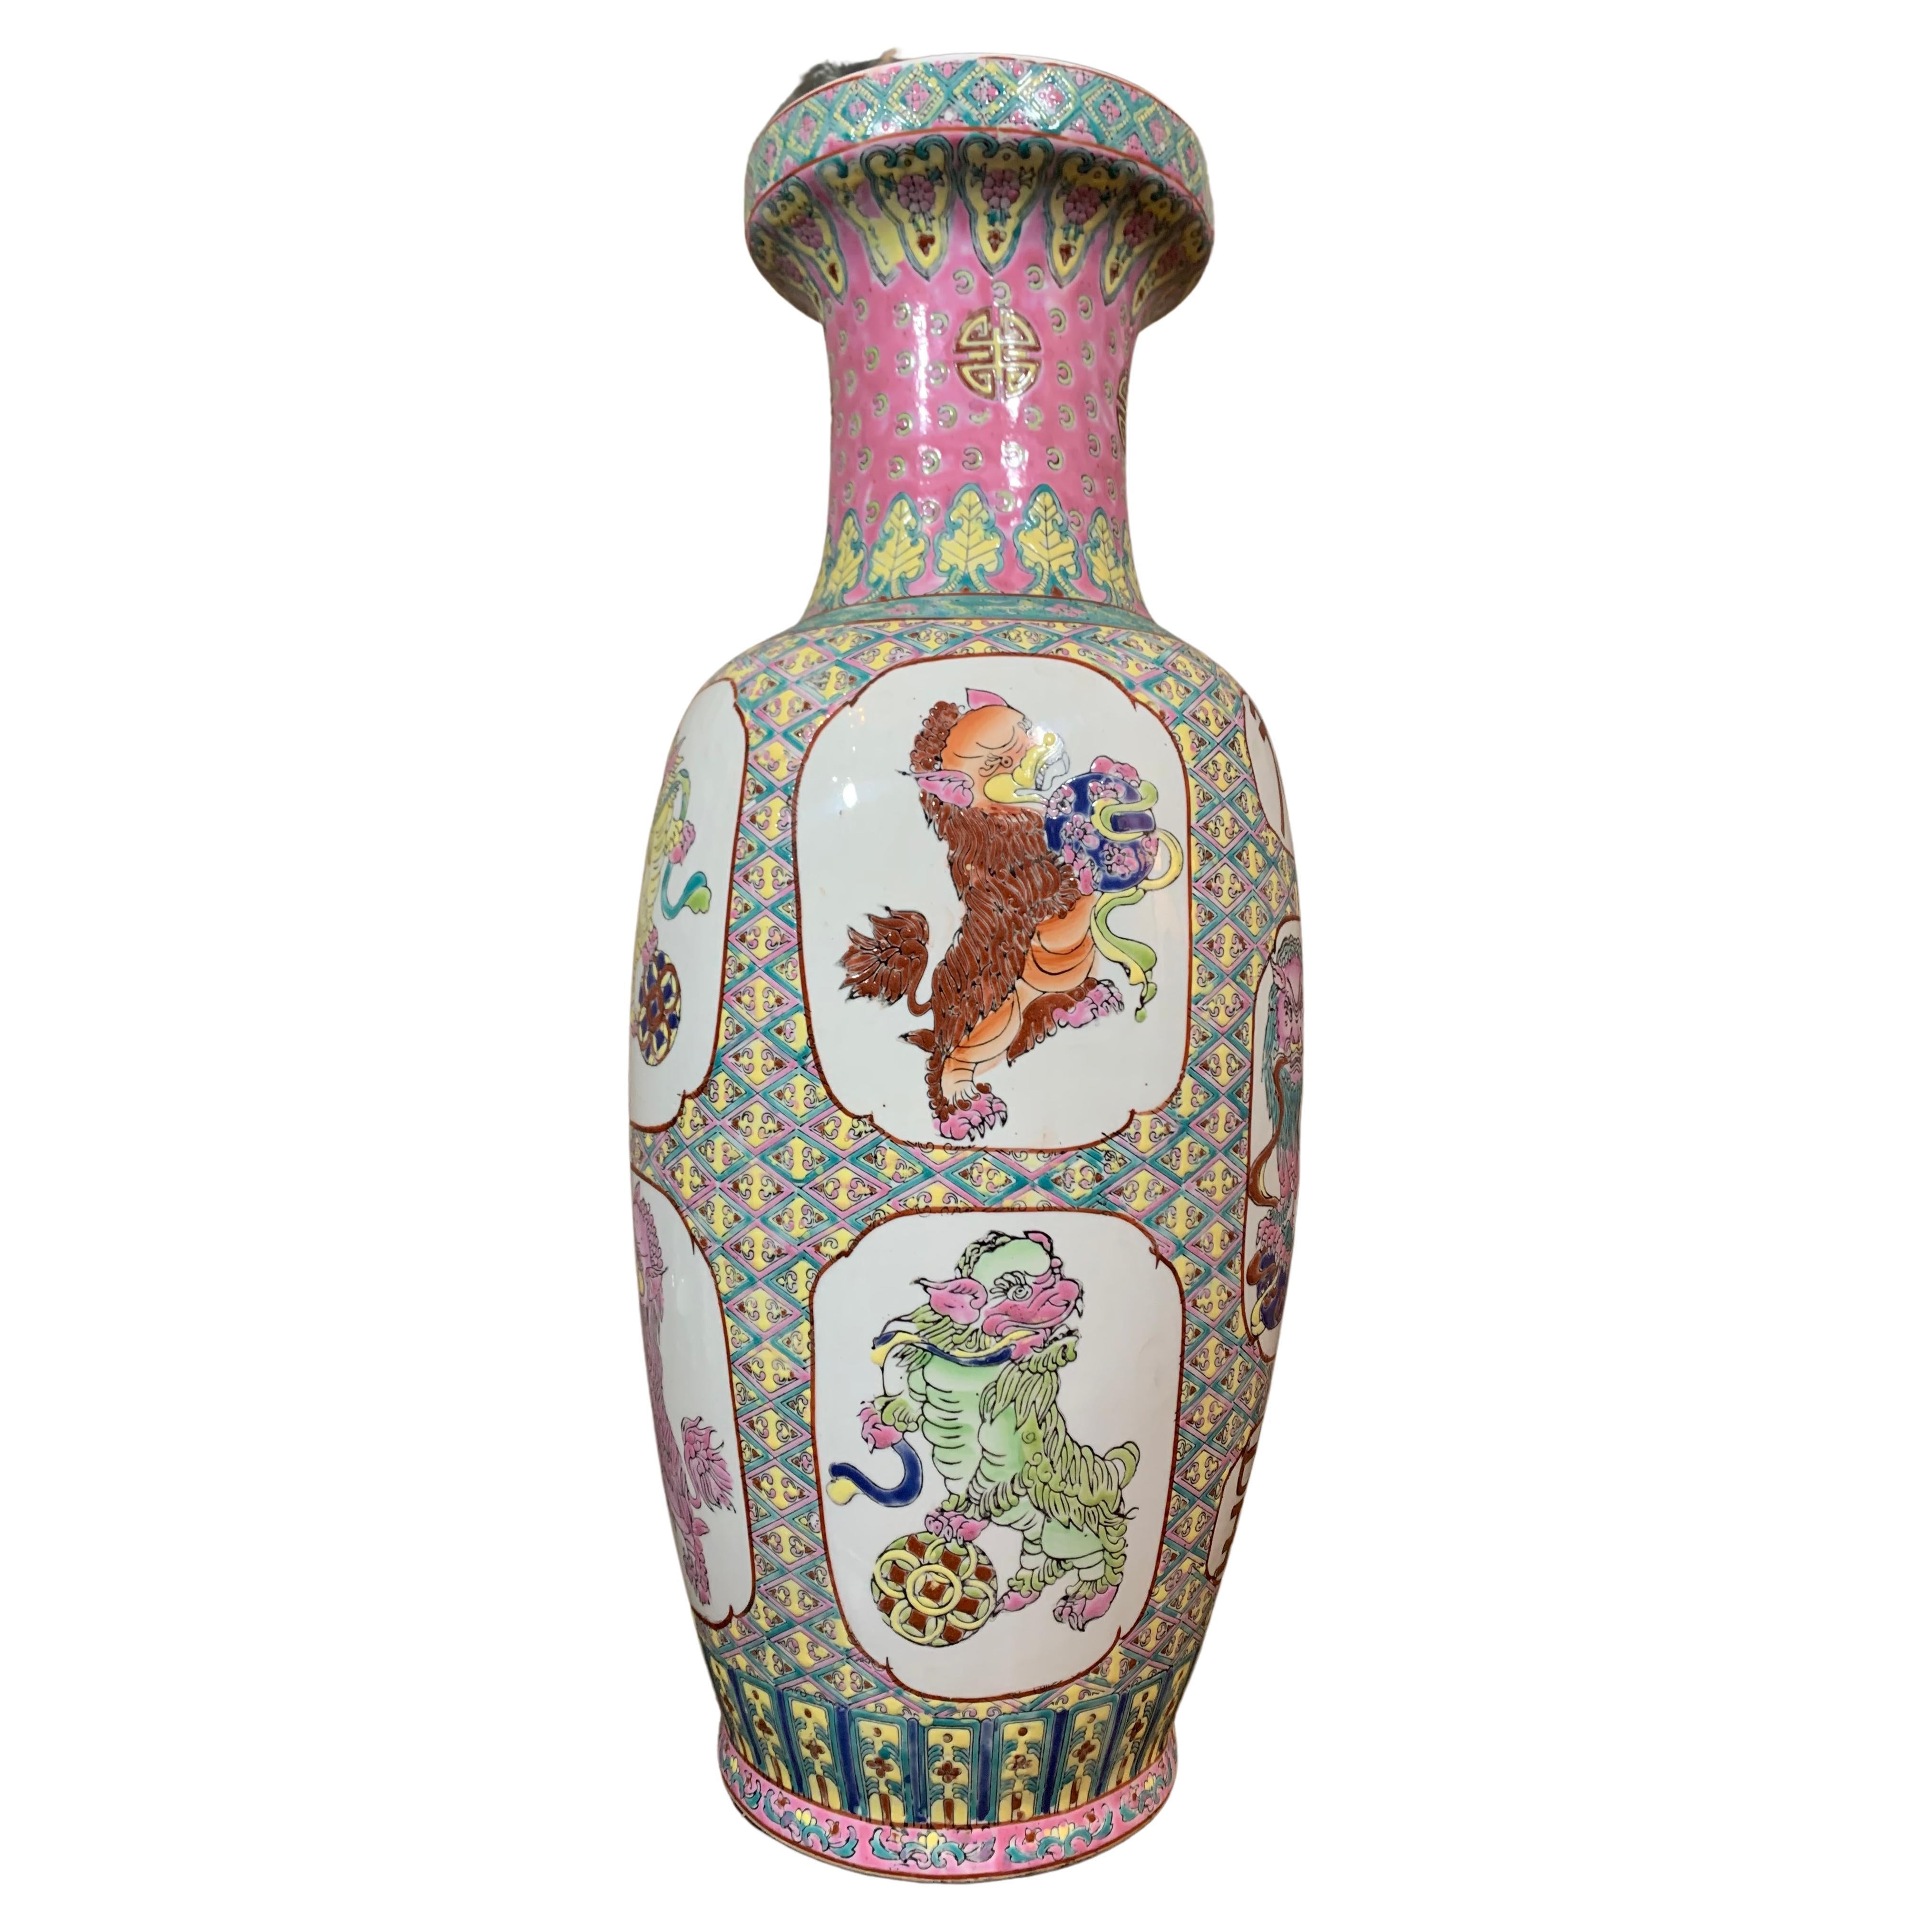 This large vase is made of Canton porcelain, manufactured in China in the early 20th century. This vase has double handles on both sides, with animal and gold forms. Resin decorations can be seen, which are white spaces often with floral and vegetal